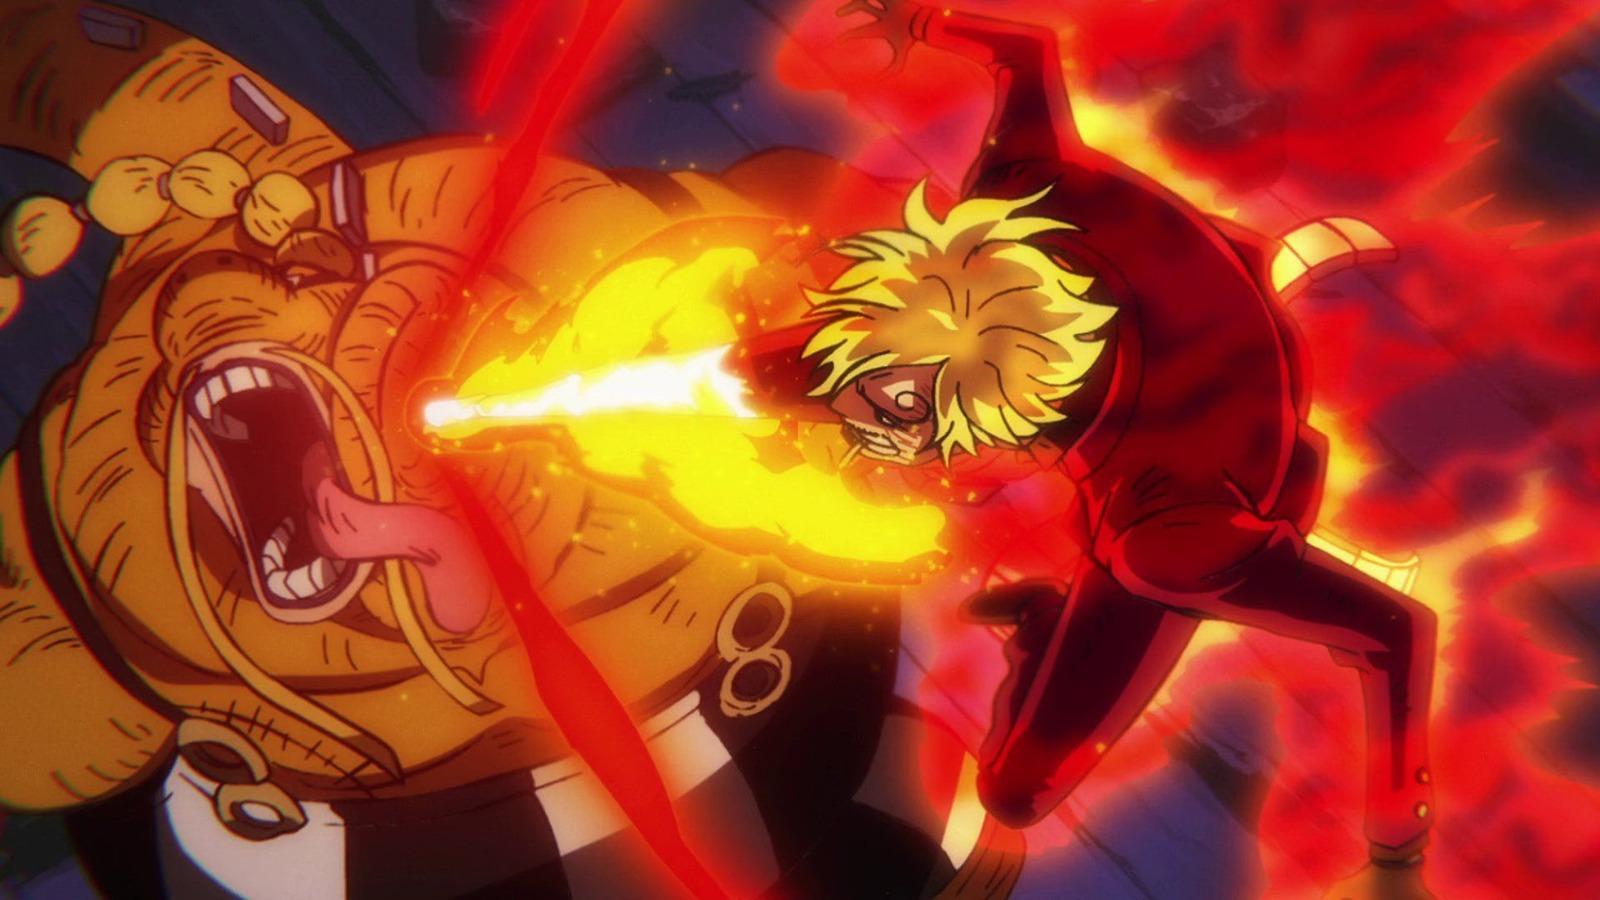 An image of Sanji using Hell Memories technique against Queen in One Piece